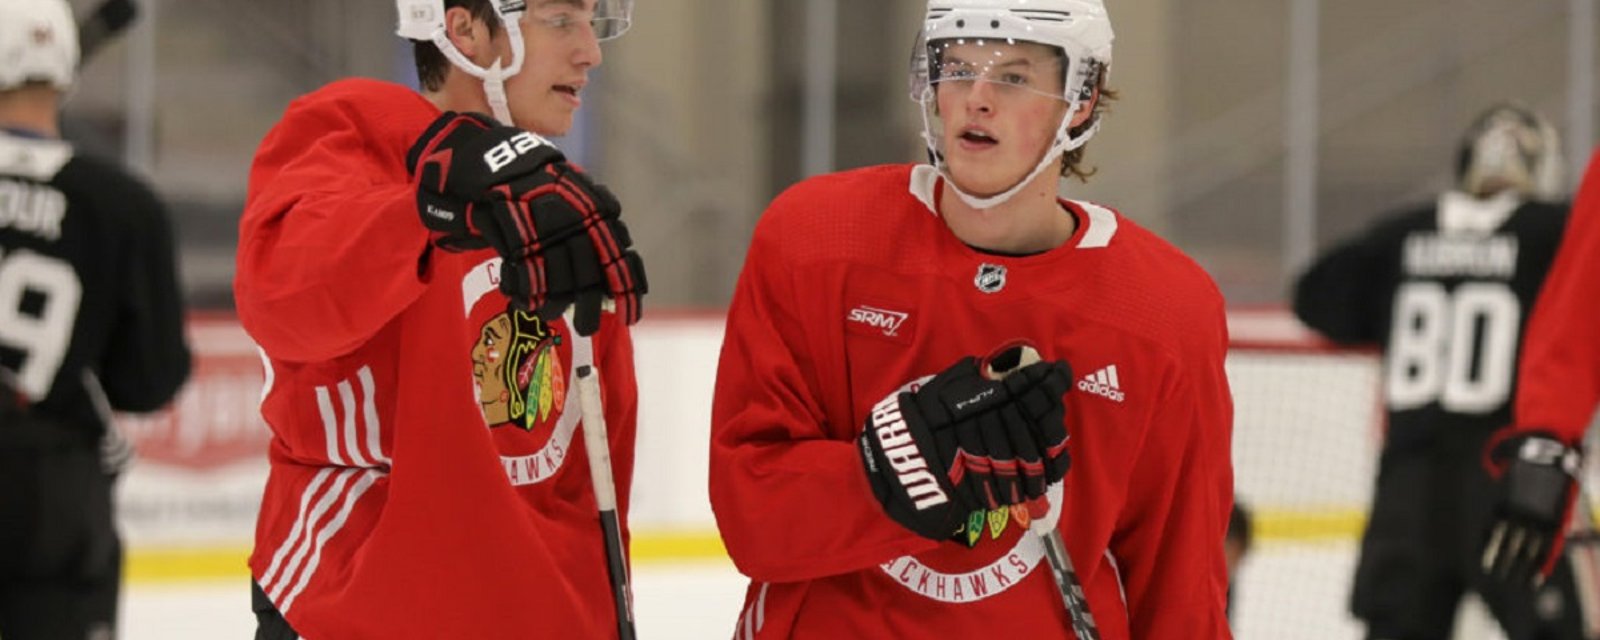 Blackhawks rookie showcase results in an injury on Day 1.